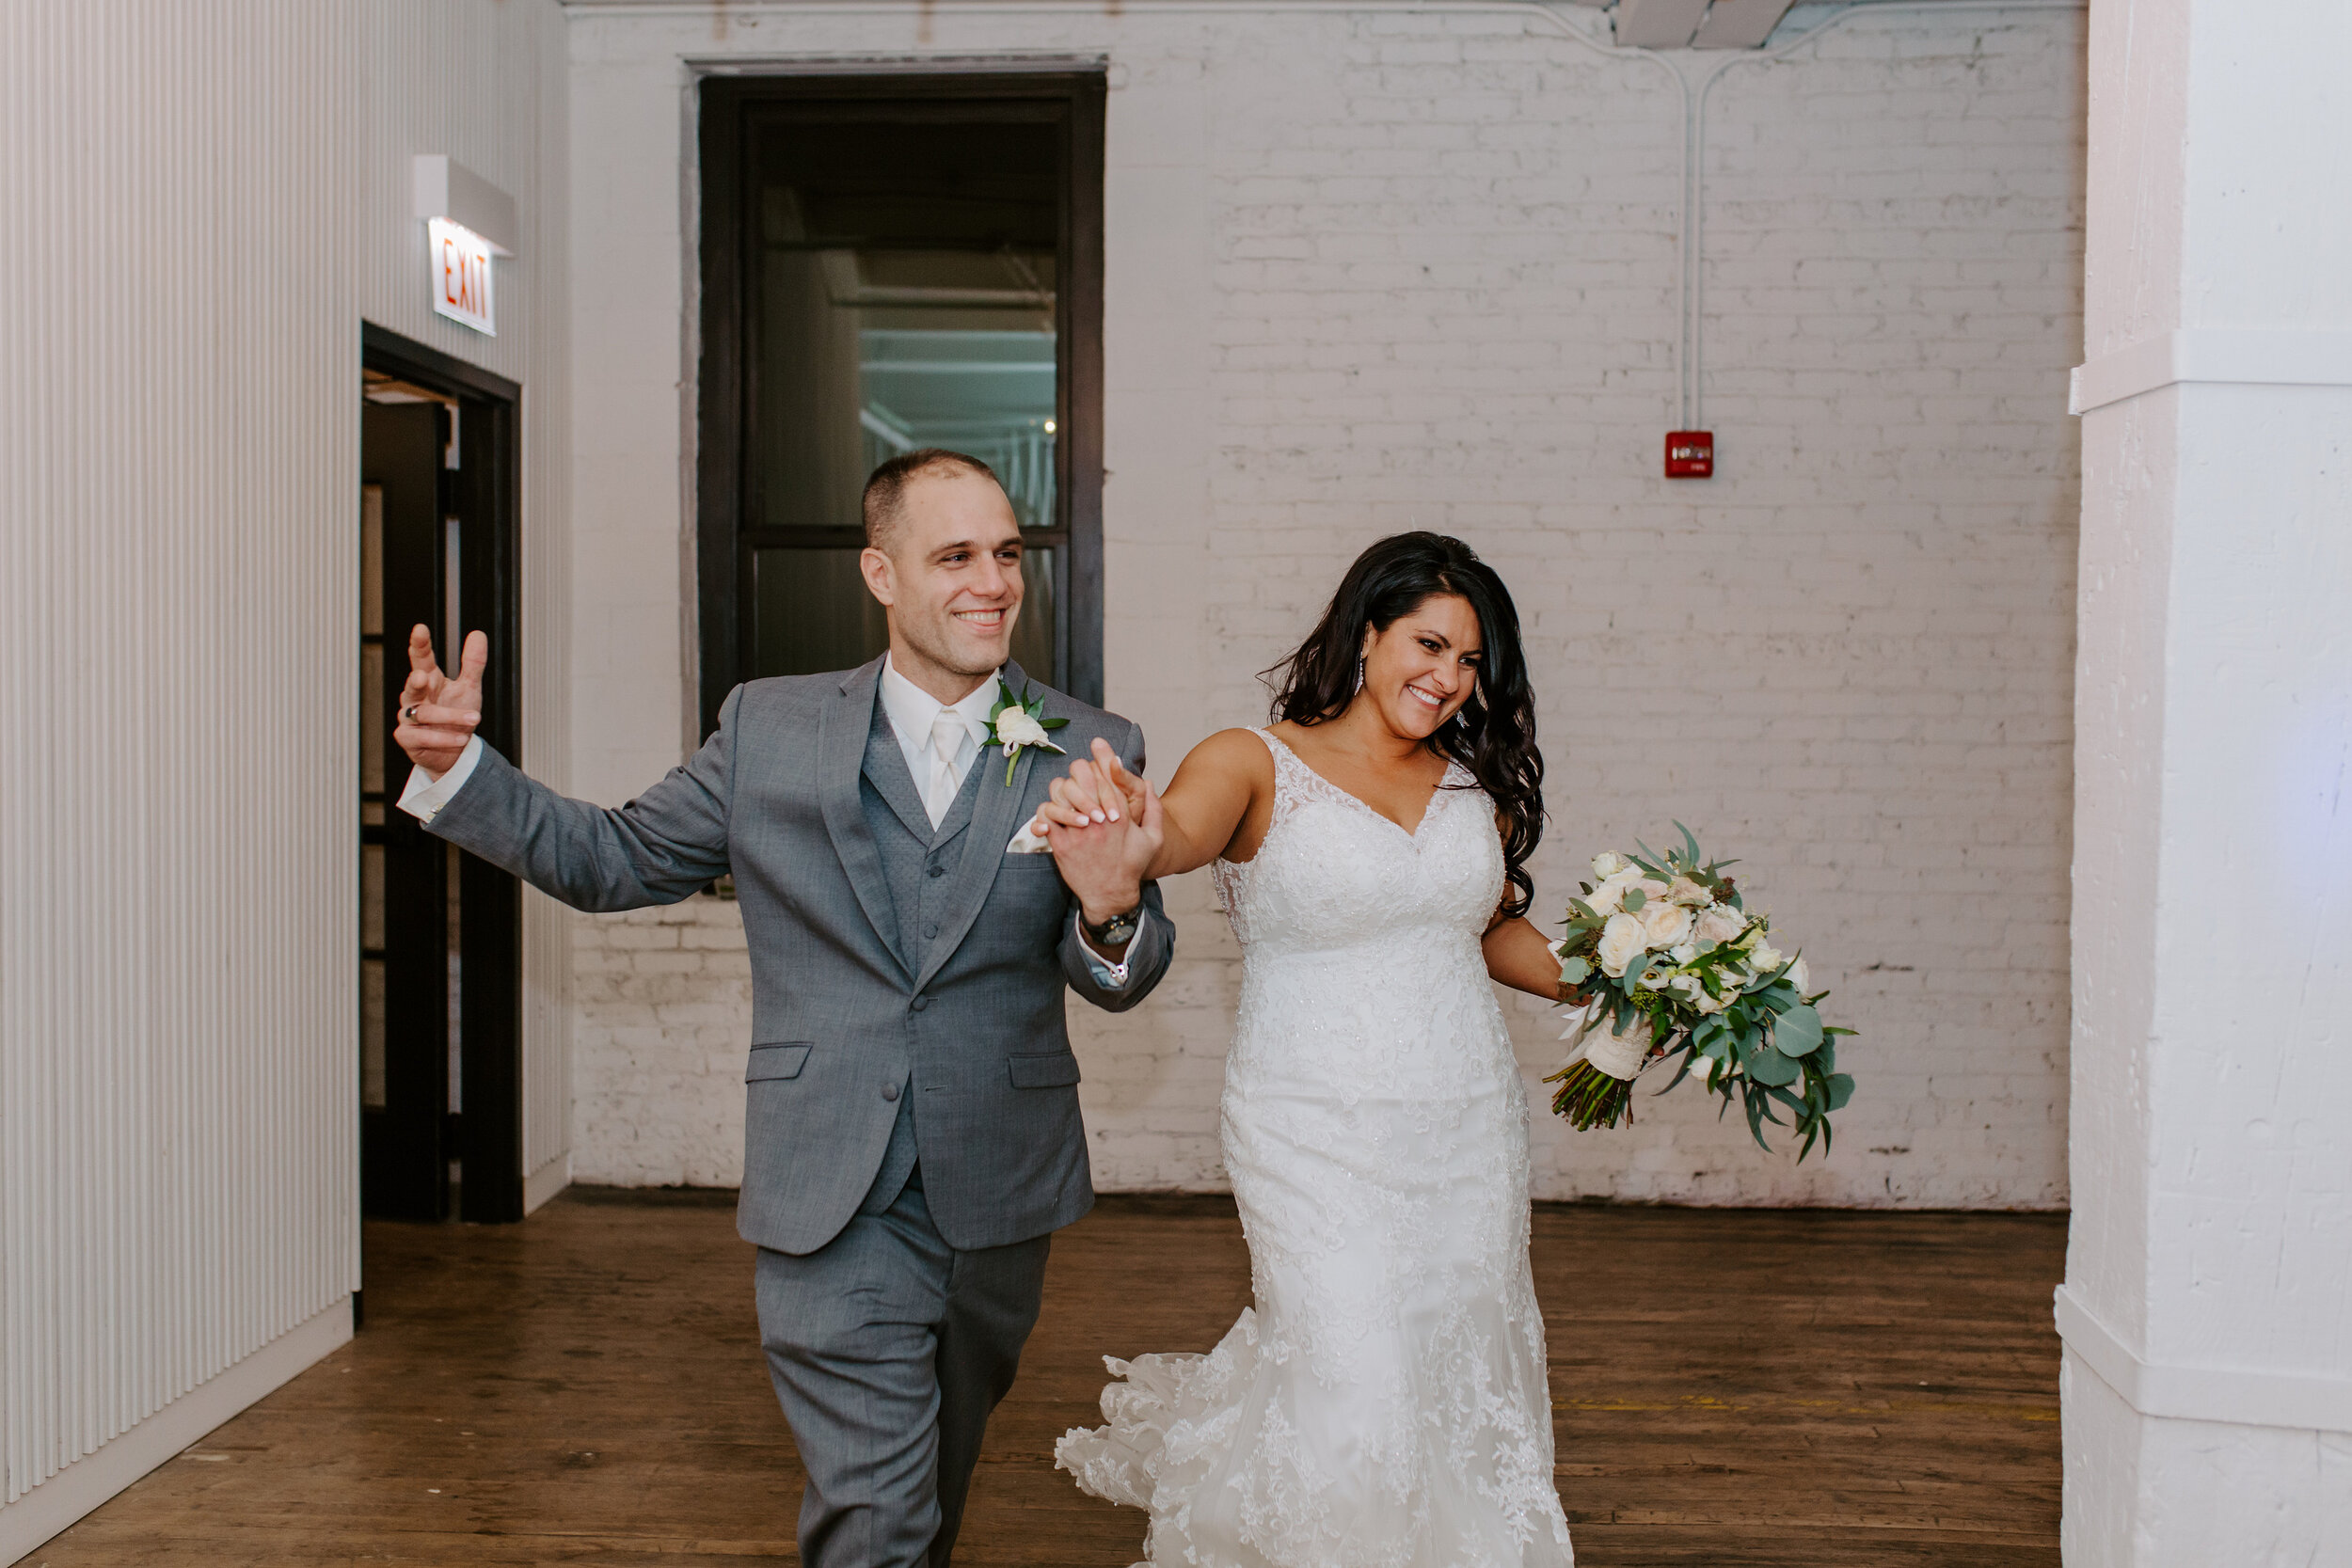 Baseball Theme Wedding at Company 251 captured on Ben Ramos Photography featured on CHI thee WED